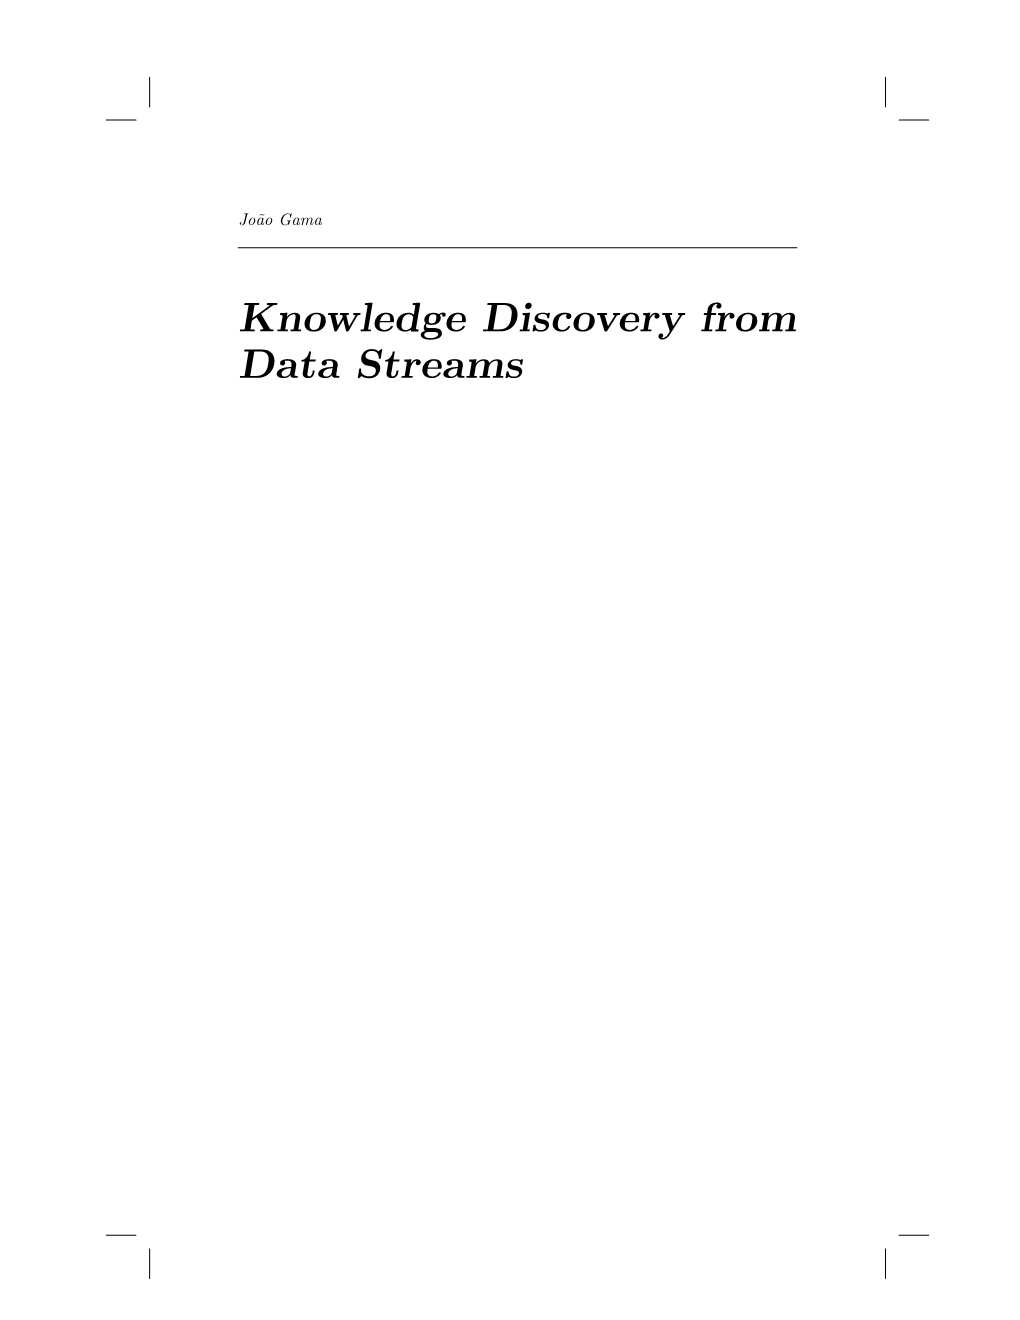 Knowledge Discovery from Data Streams Ii Contents